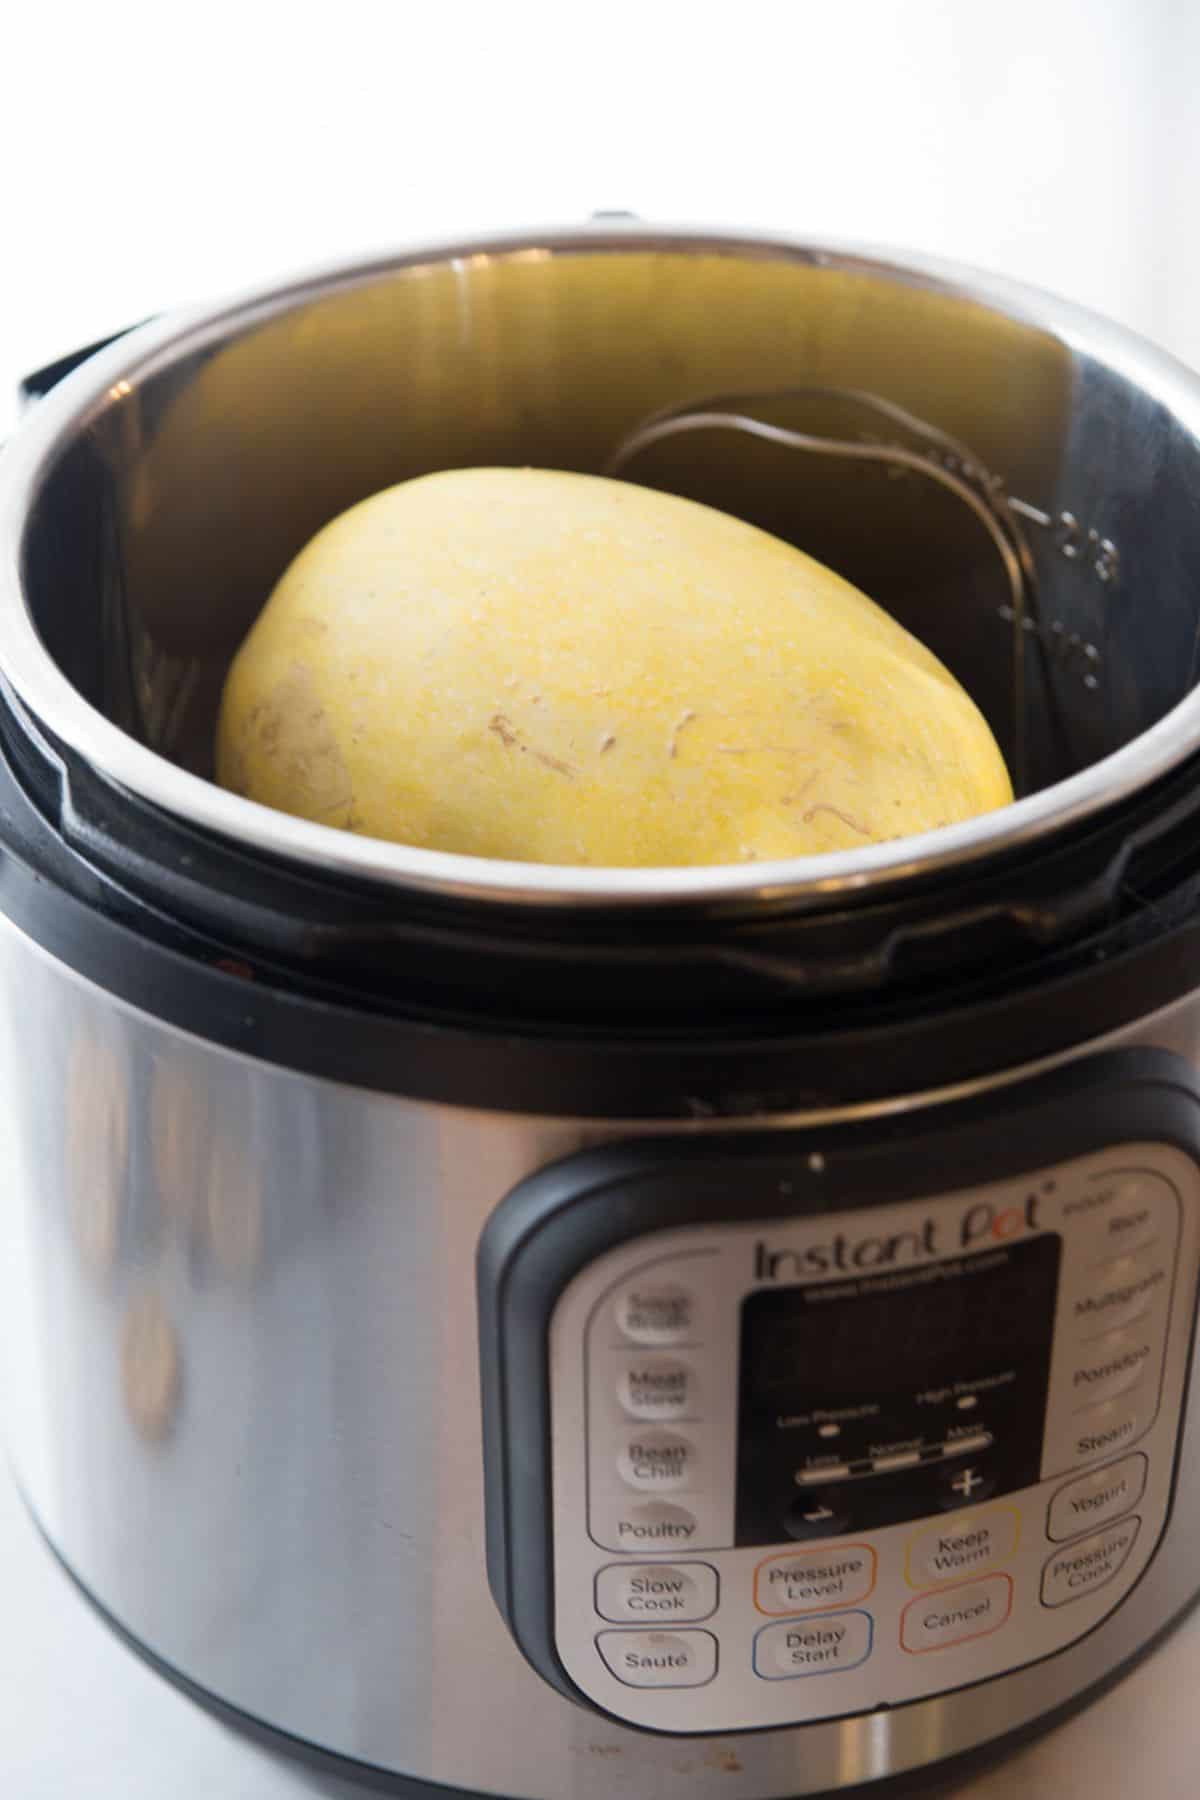 An instant pot with a whole, uncooked spaghetti squash.